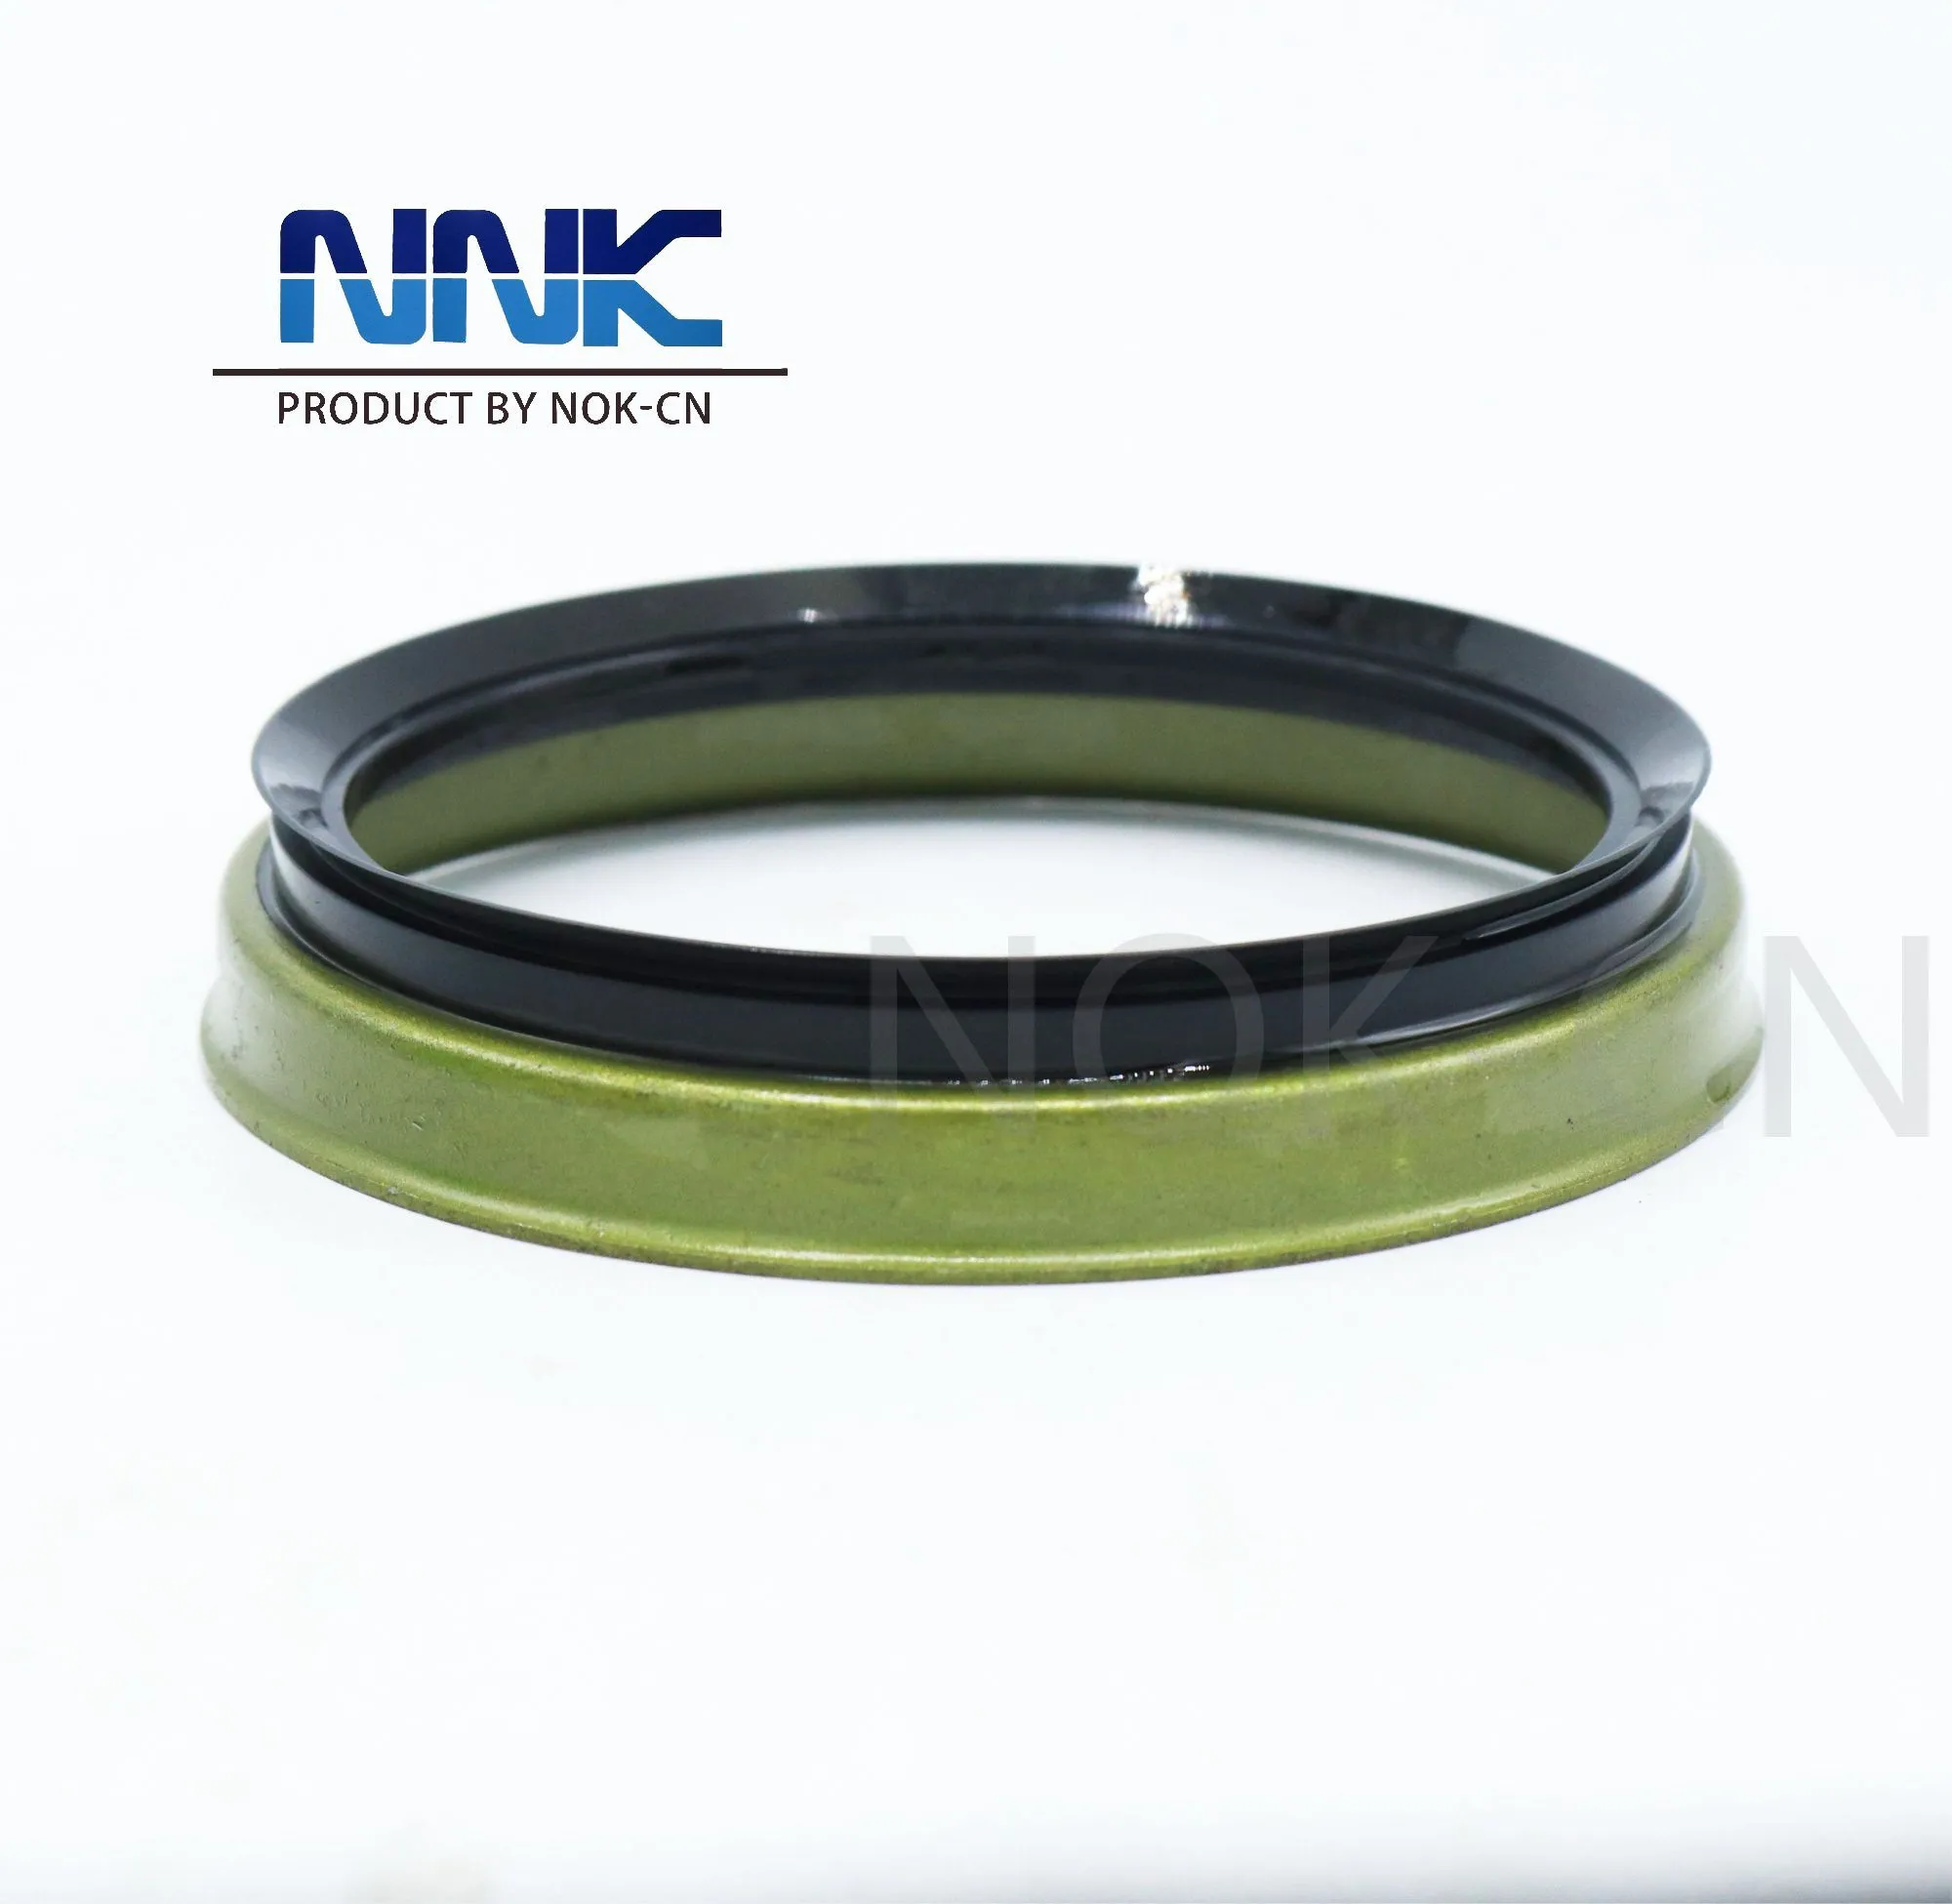 Toyota OEM Genuine SEAL Front Wheel Oil Seal 90312-T0001 For Toyota